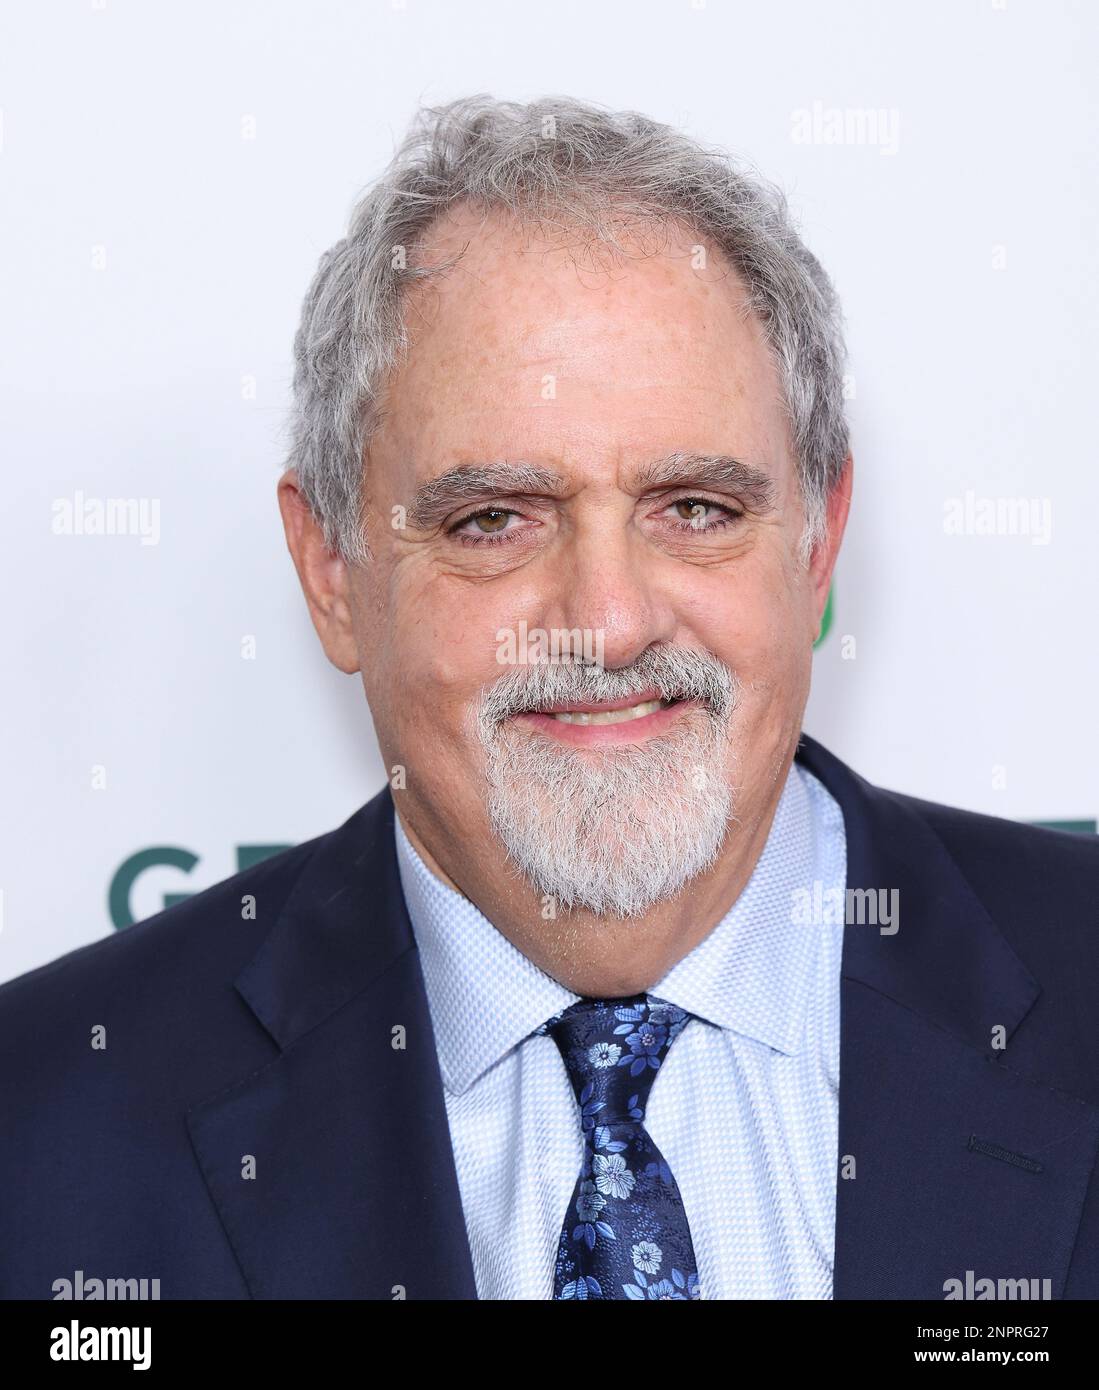 Beverly Hills, USA. 25th Feb, 2023. Jon Landau attends the 2023 Producers Guild Awards at The Beverly Hilton on February 25, 2023 in Beverly Hills, California. Photo: CraSH/imageSPACE Credit: Imagespace/Alamy Live News Stock Photo